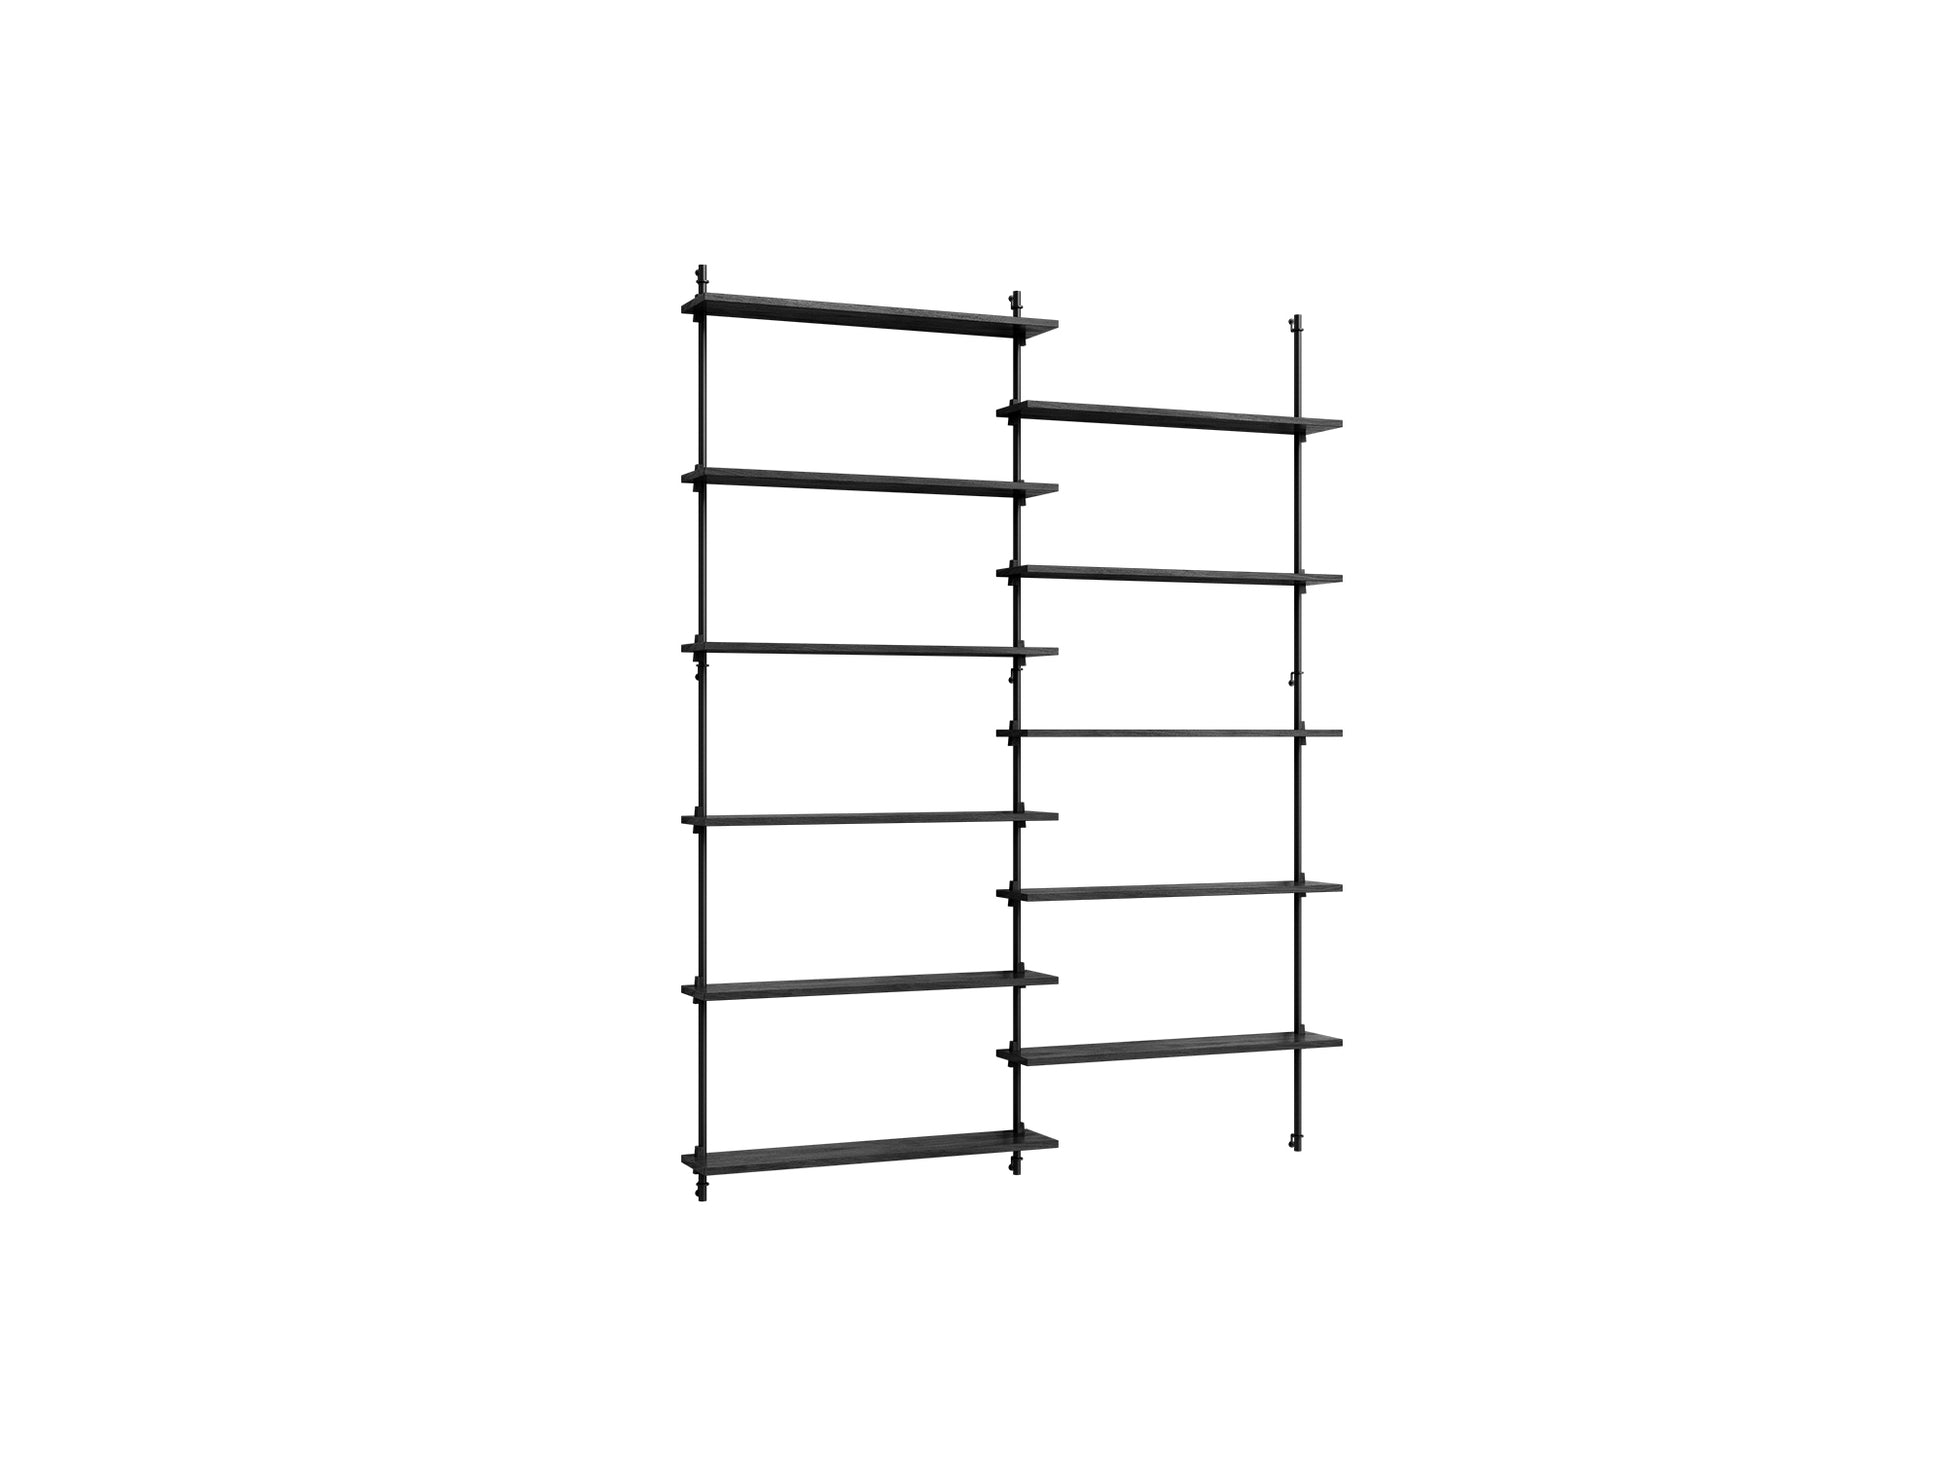 Wall Shelving System Sets (200 cm) by Moebe - WS.200.2 / Black Uprights / Black Painted Oak